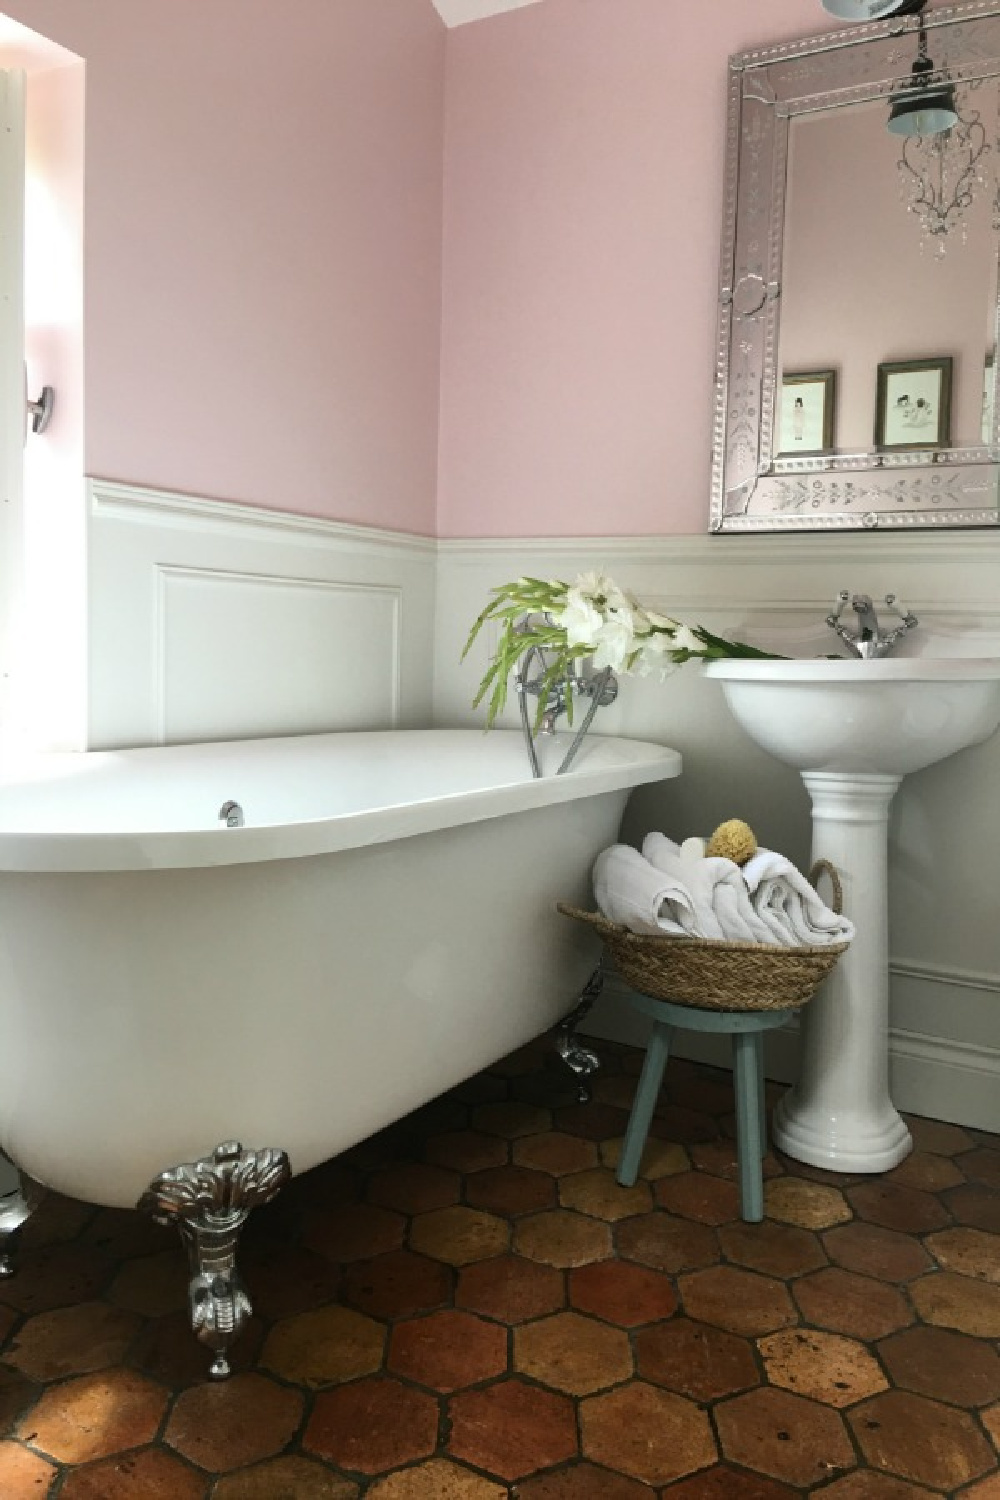 Farrow and Ball Middleton Pink walls in girls bathroom in French farmhouse by Vivi et Margot. Reclaimed antique terracotta tile flooring. Clawfoot tub and pedestal sink. #bathroom #farrowandball #middletonpink #clawfoottub #vivietmargot #terracottatilefloor #authentic #frenchcountry